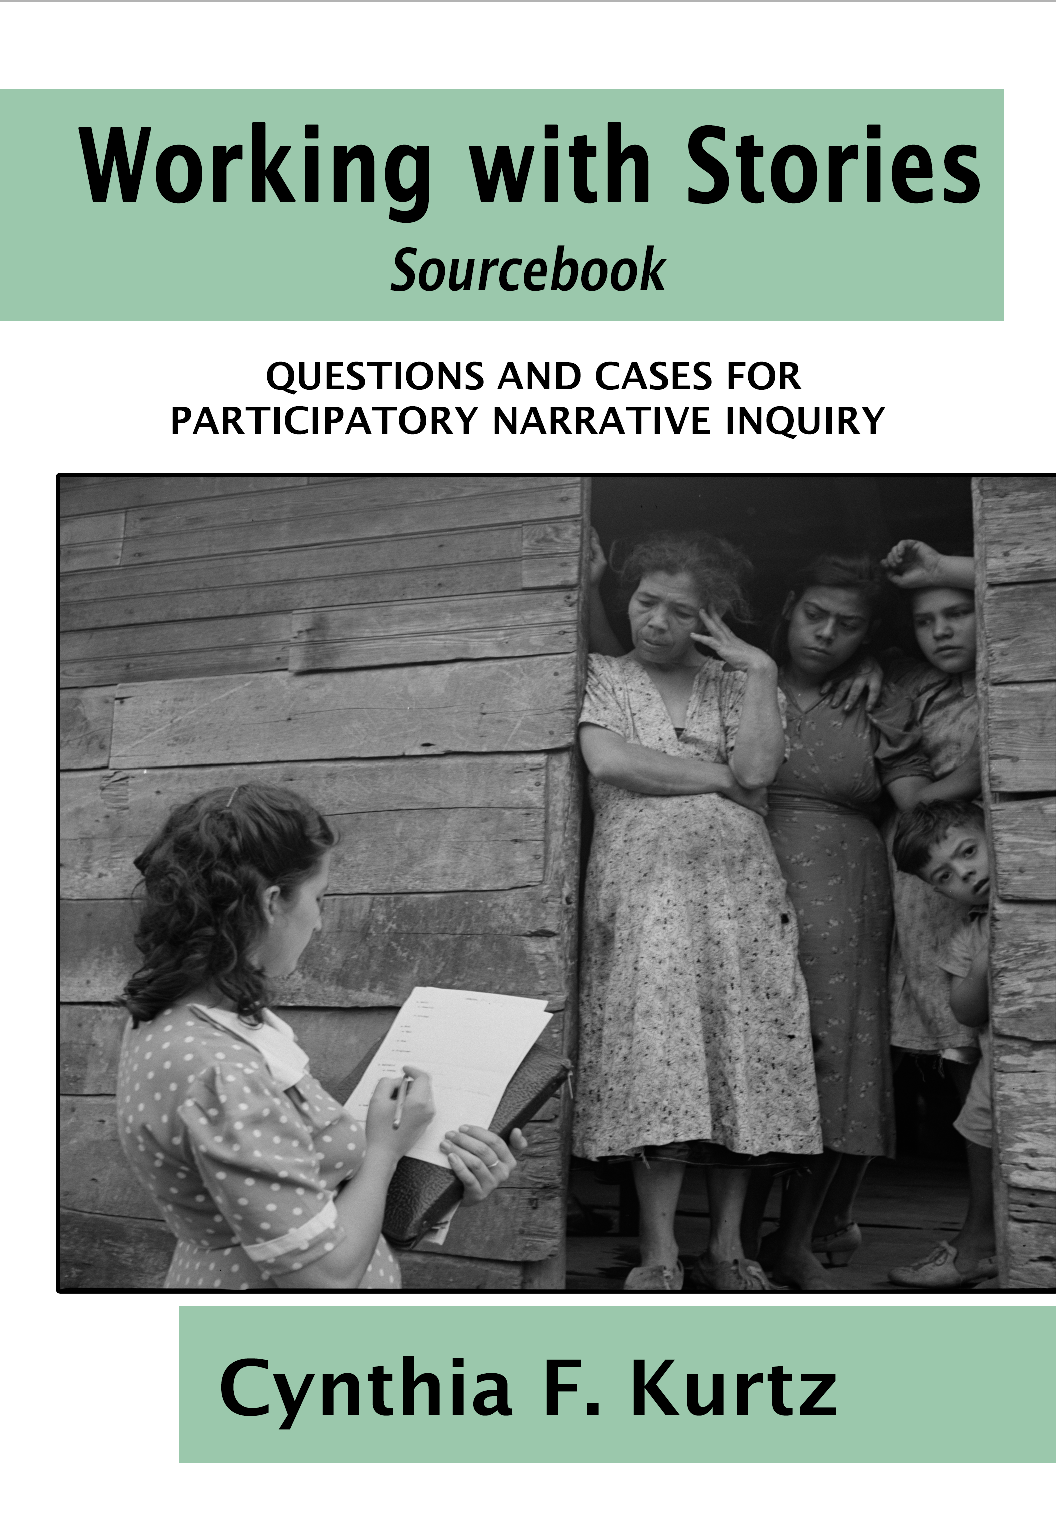 Working with Stories Sourcebook: Questions and Case Studies for Participatory Narrative Inquiry